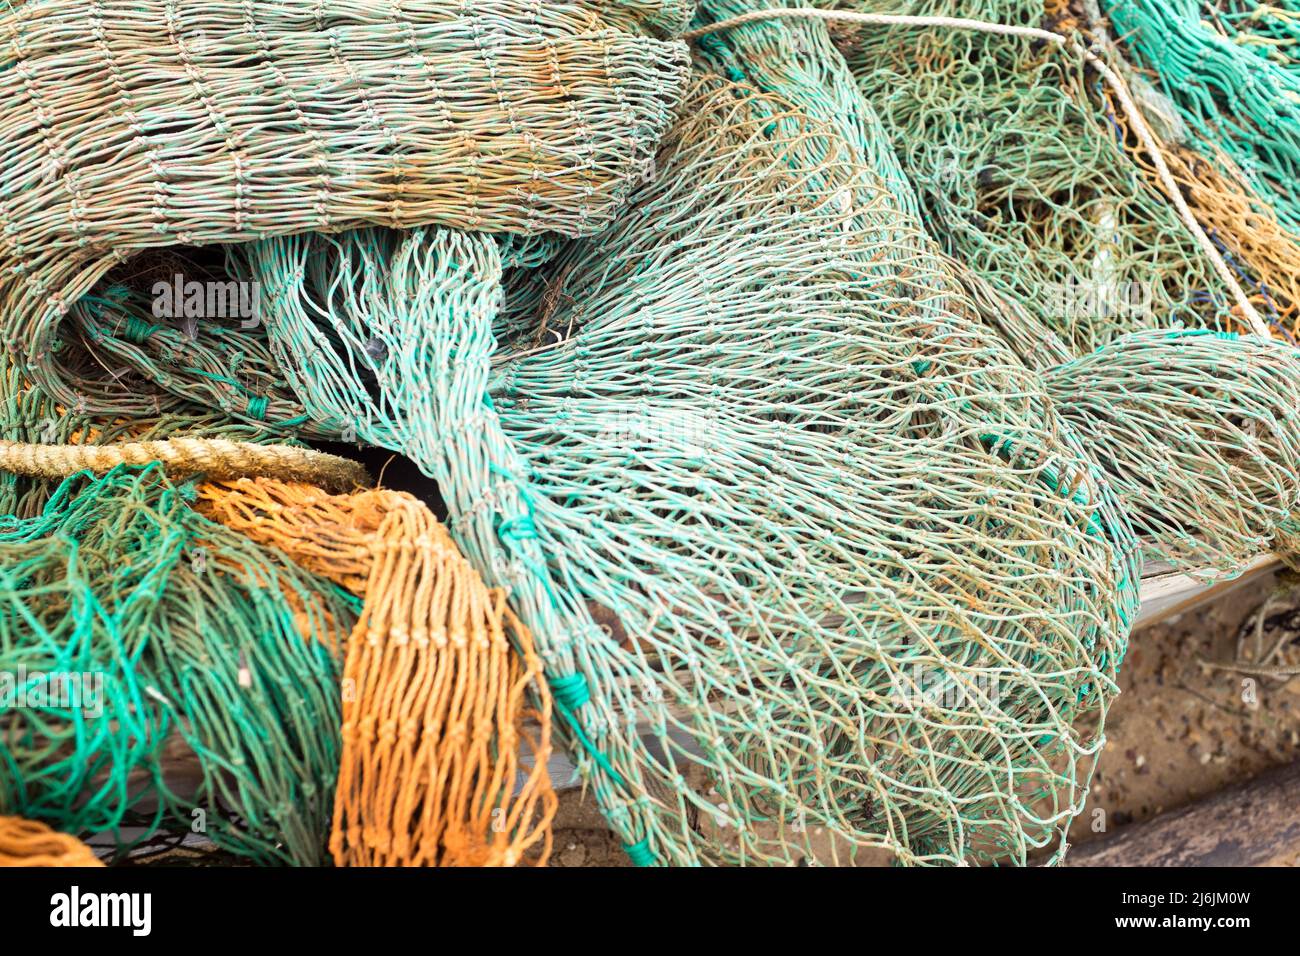 A tangle of discarded green and orange fishing nets in the harbour of West Mersea, Mersea Island, Essex United Kingdom Stock Photo